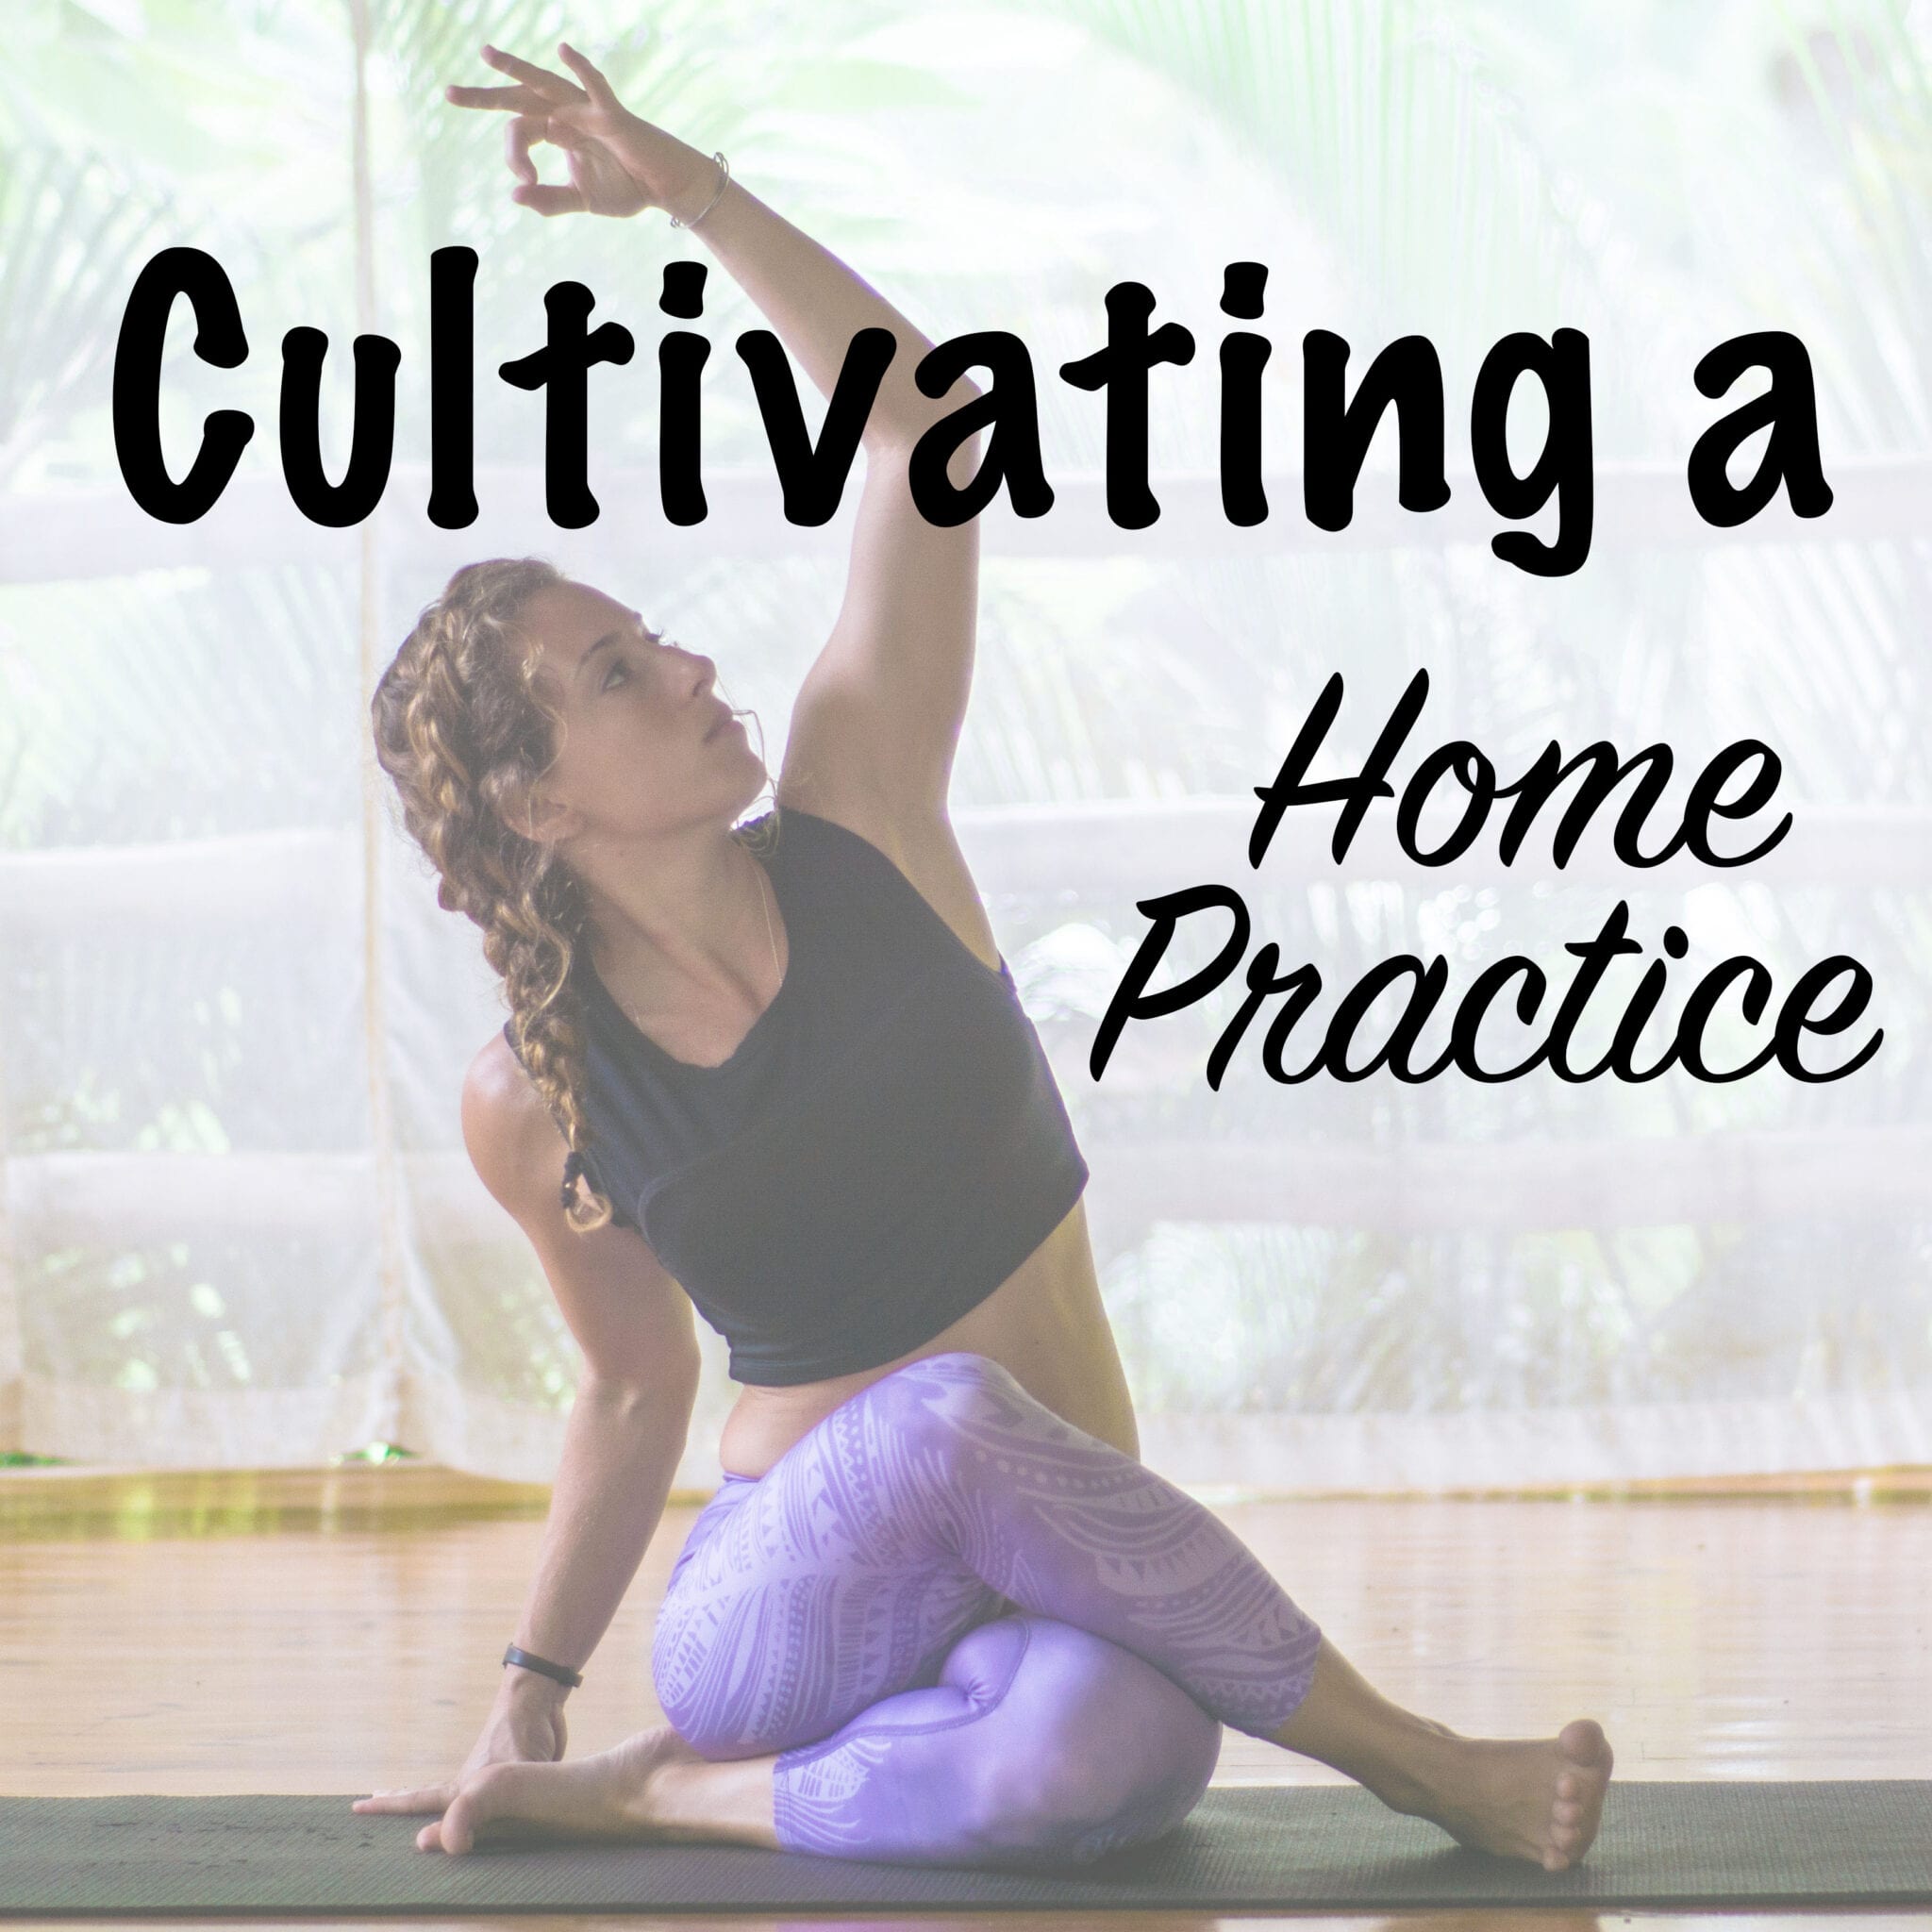 Cultivating a Home Practice in 4 Easy Steps